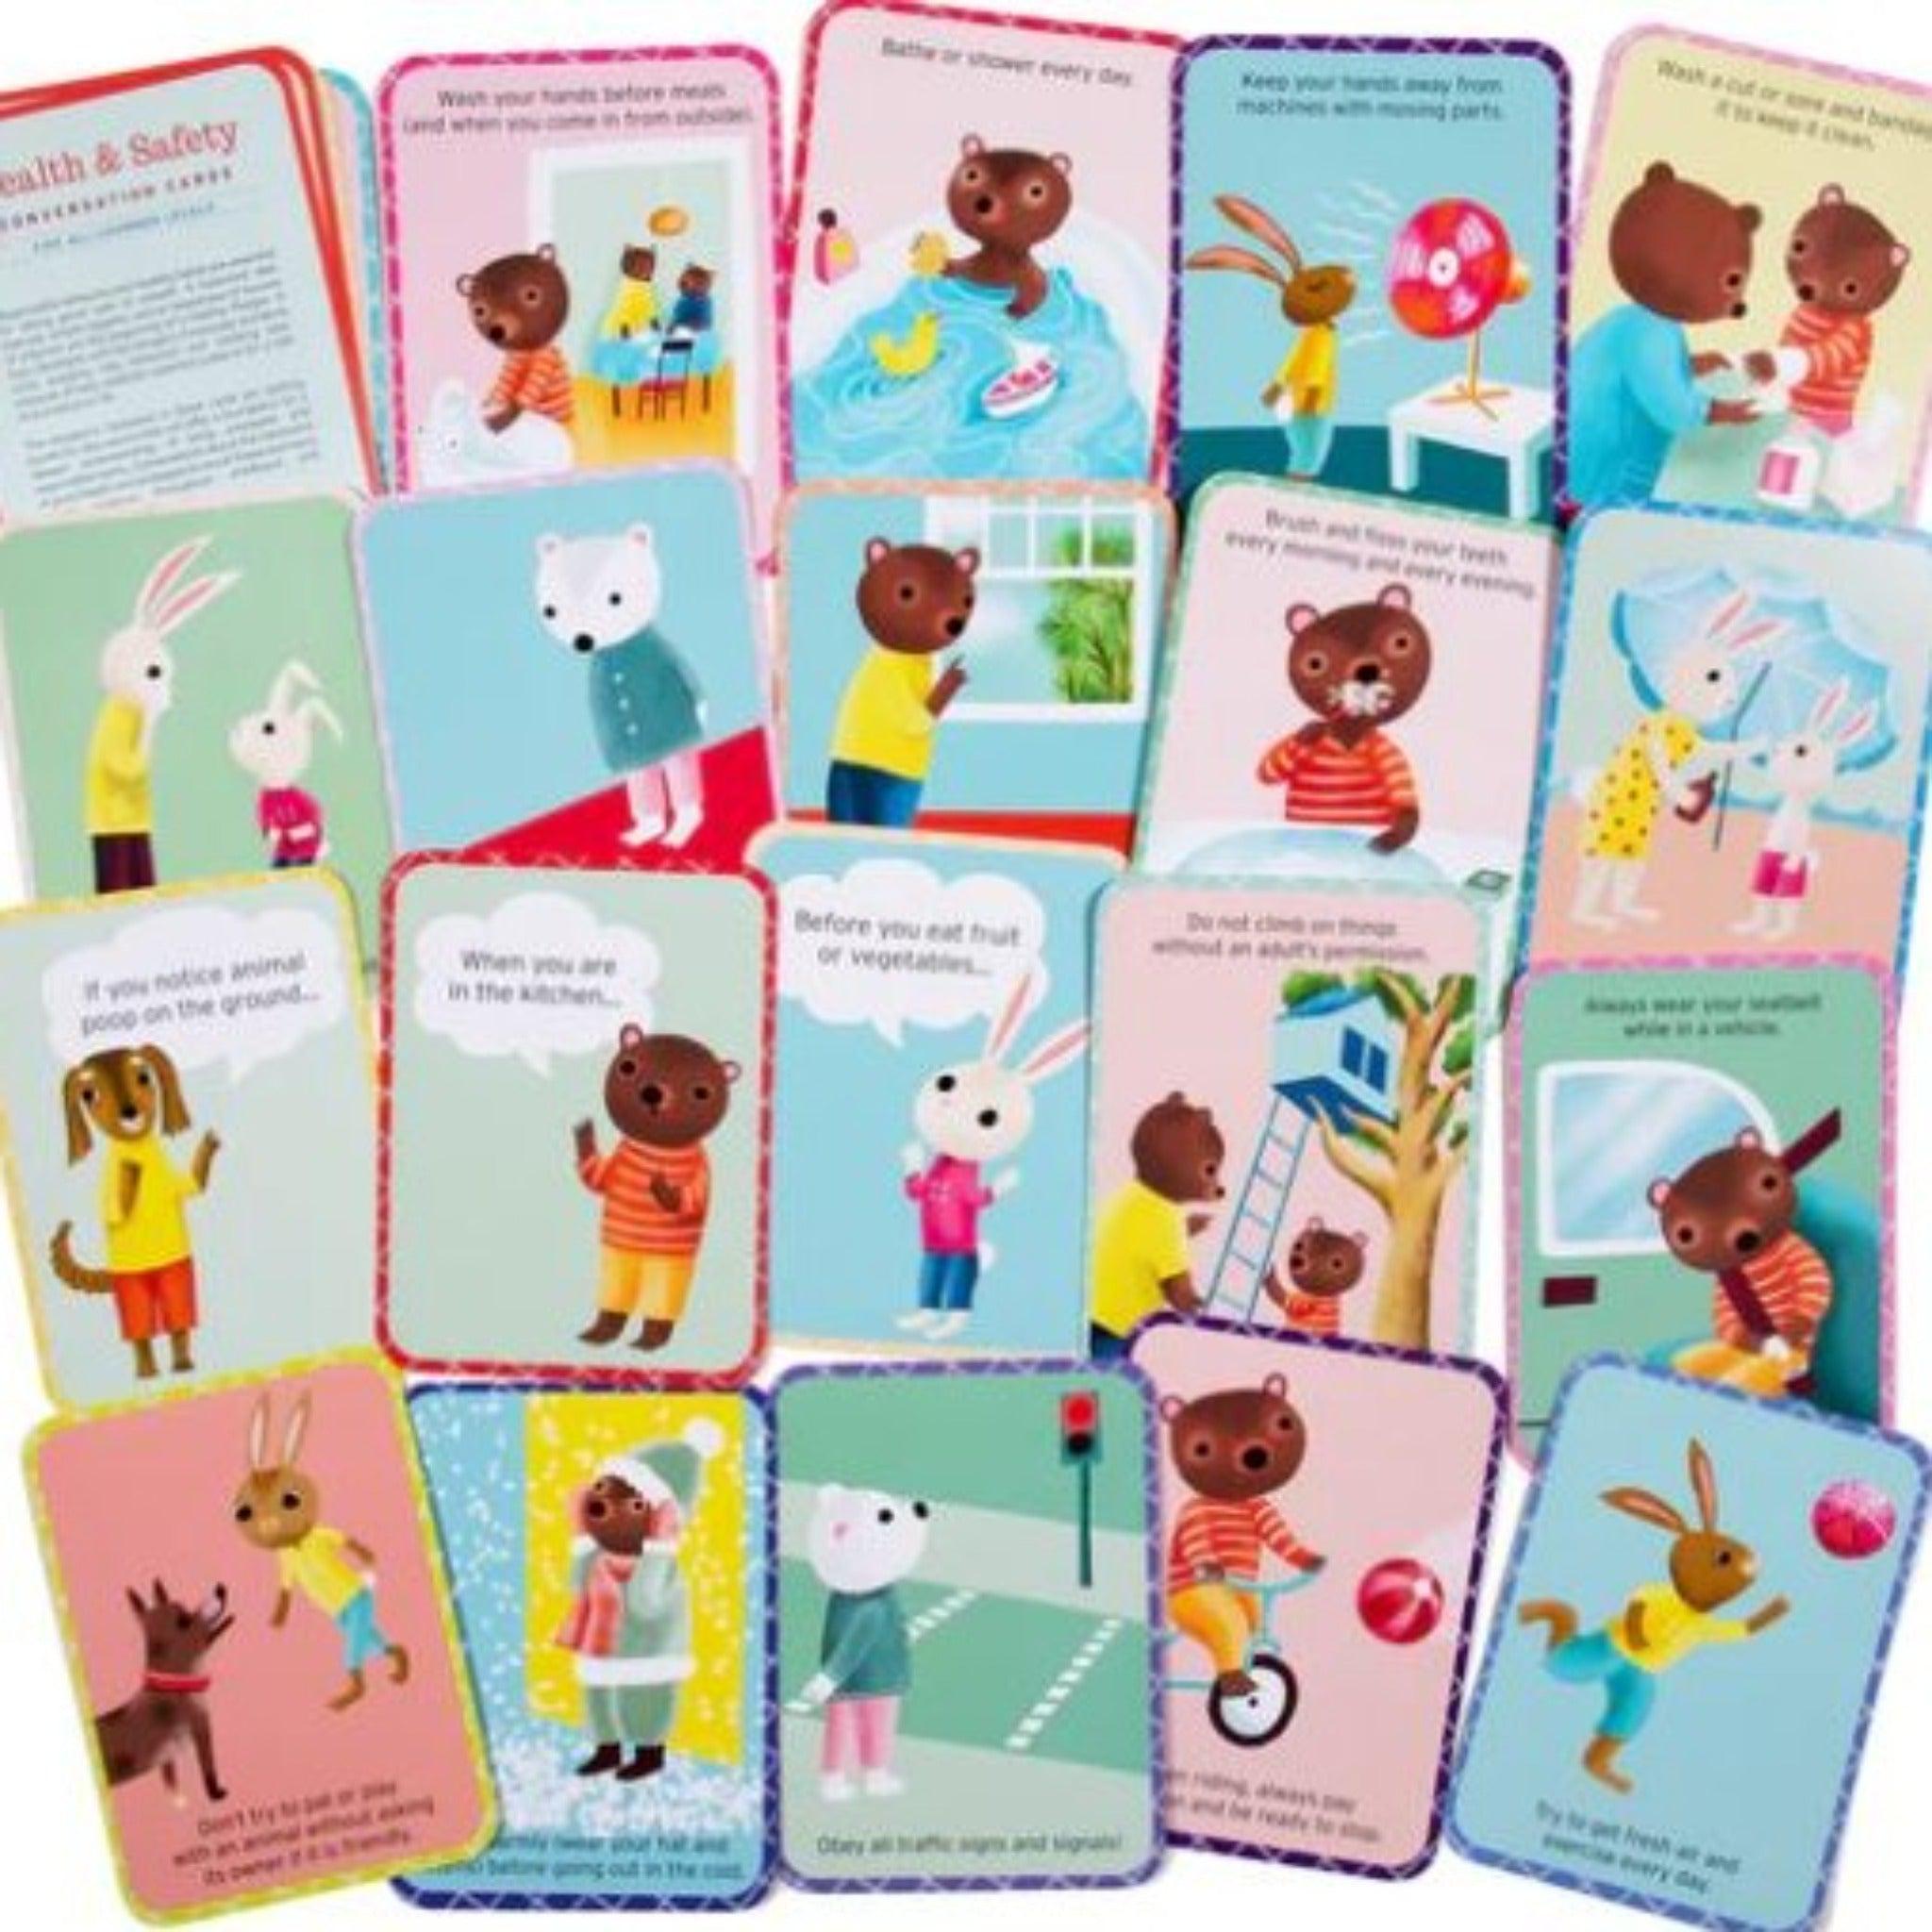 eeBoo-Health and Safety - Conversation Cards-51270-Legacy Toys